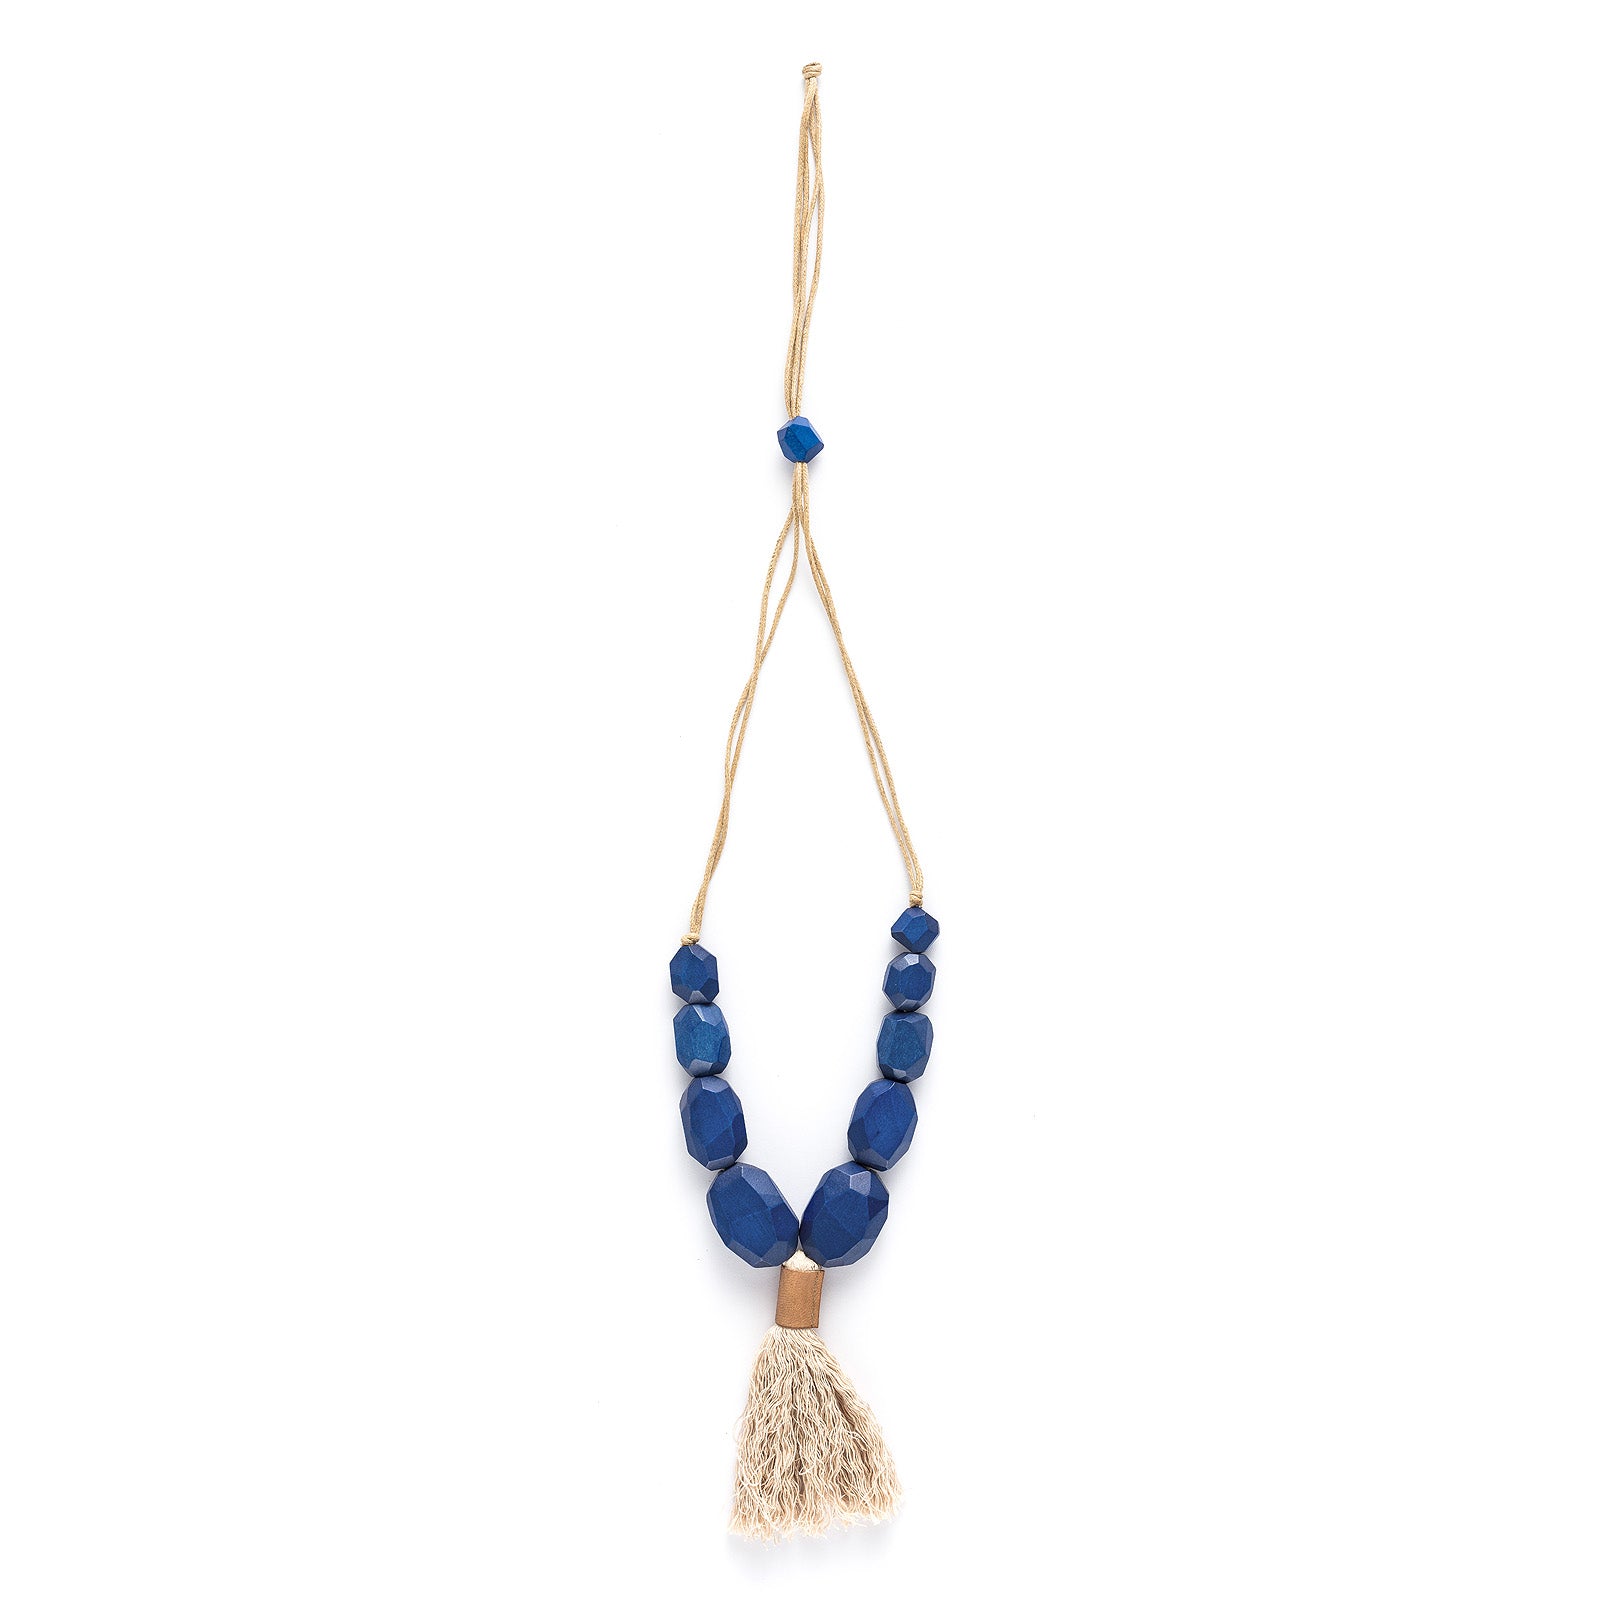 Faceted rocks with tassel necklace